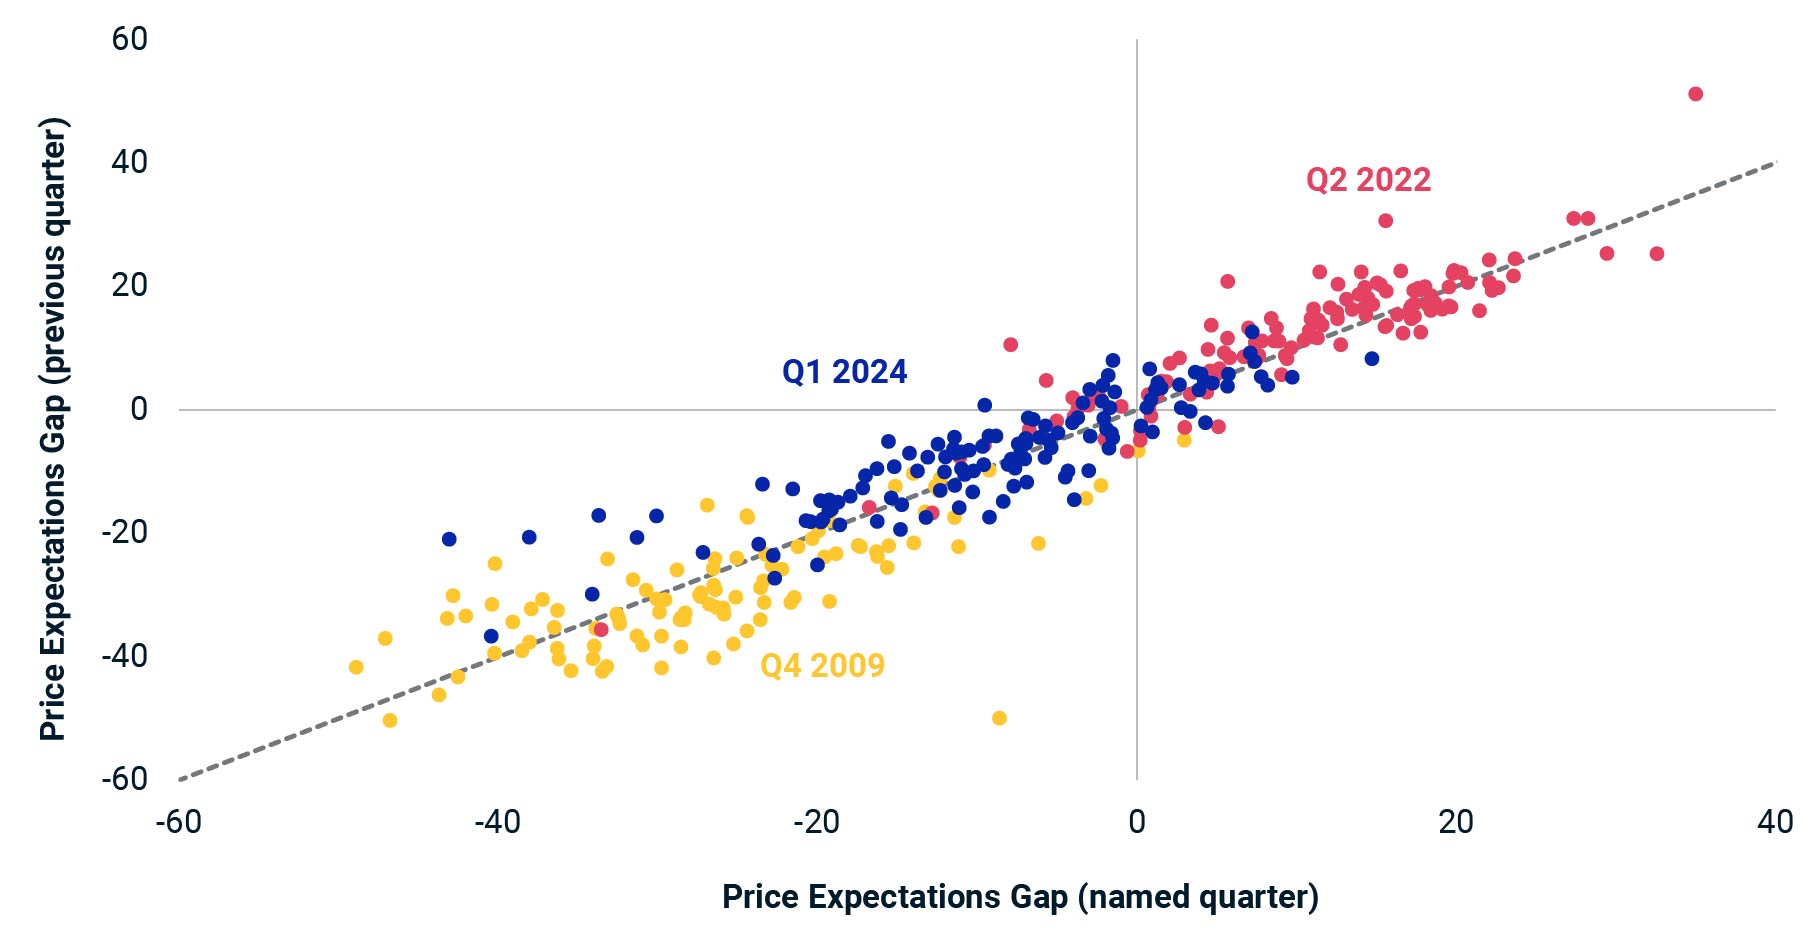 The scatter chart plots the change in the price expectations gap for the periods Q1 2024, Q2 2022 and Q4 2009.